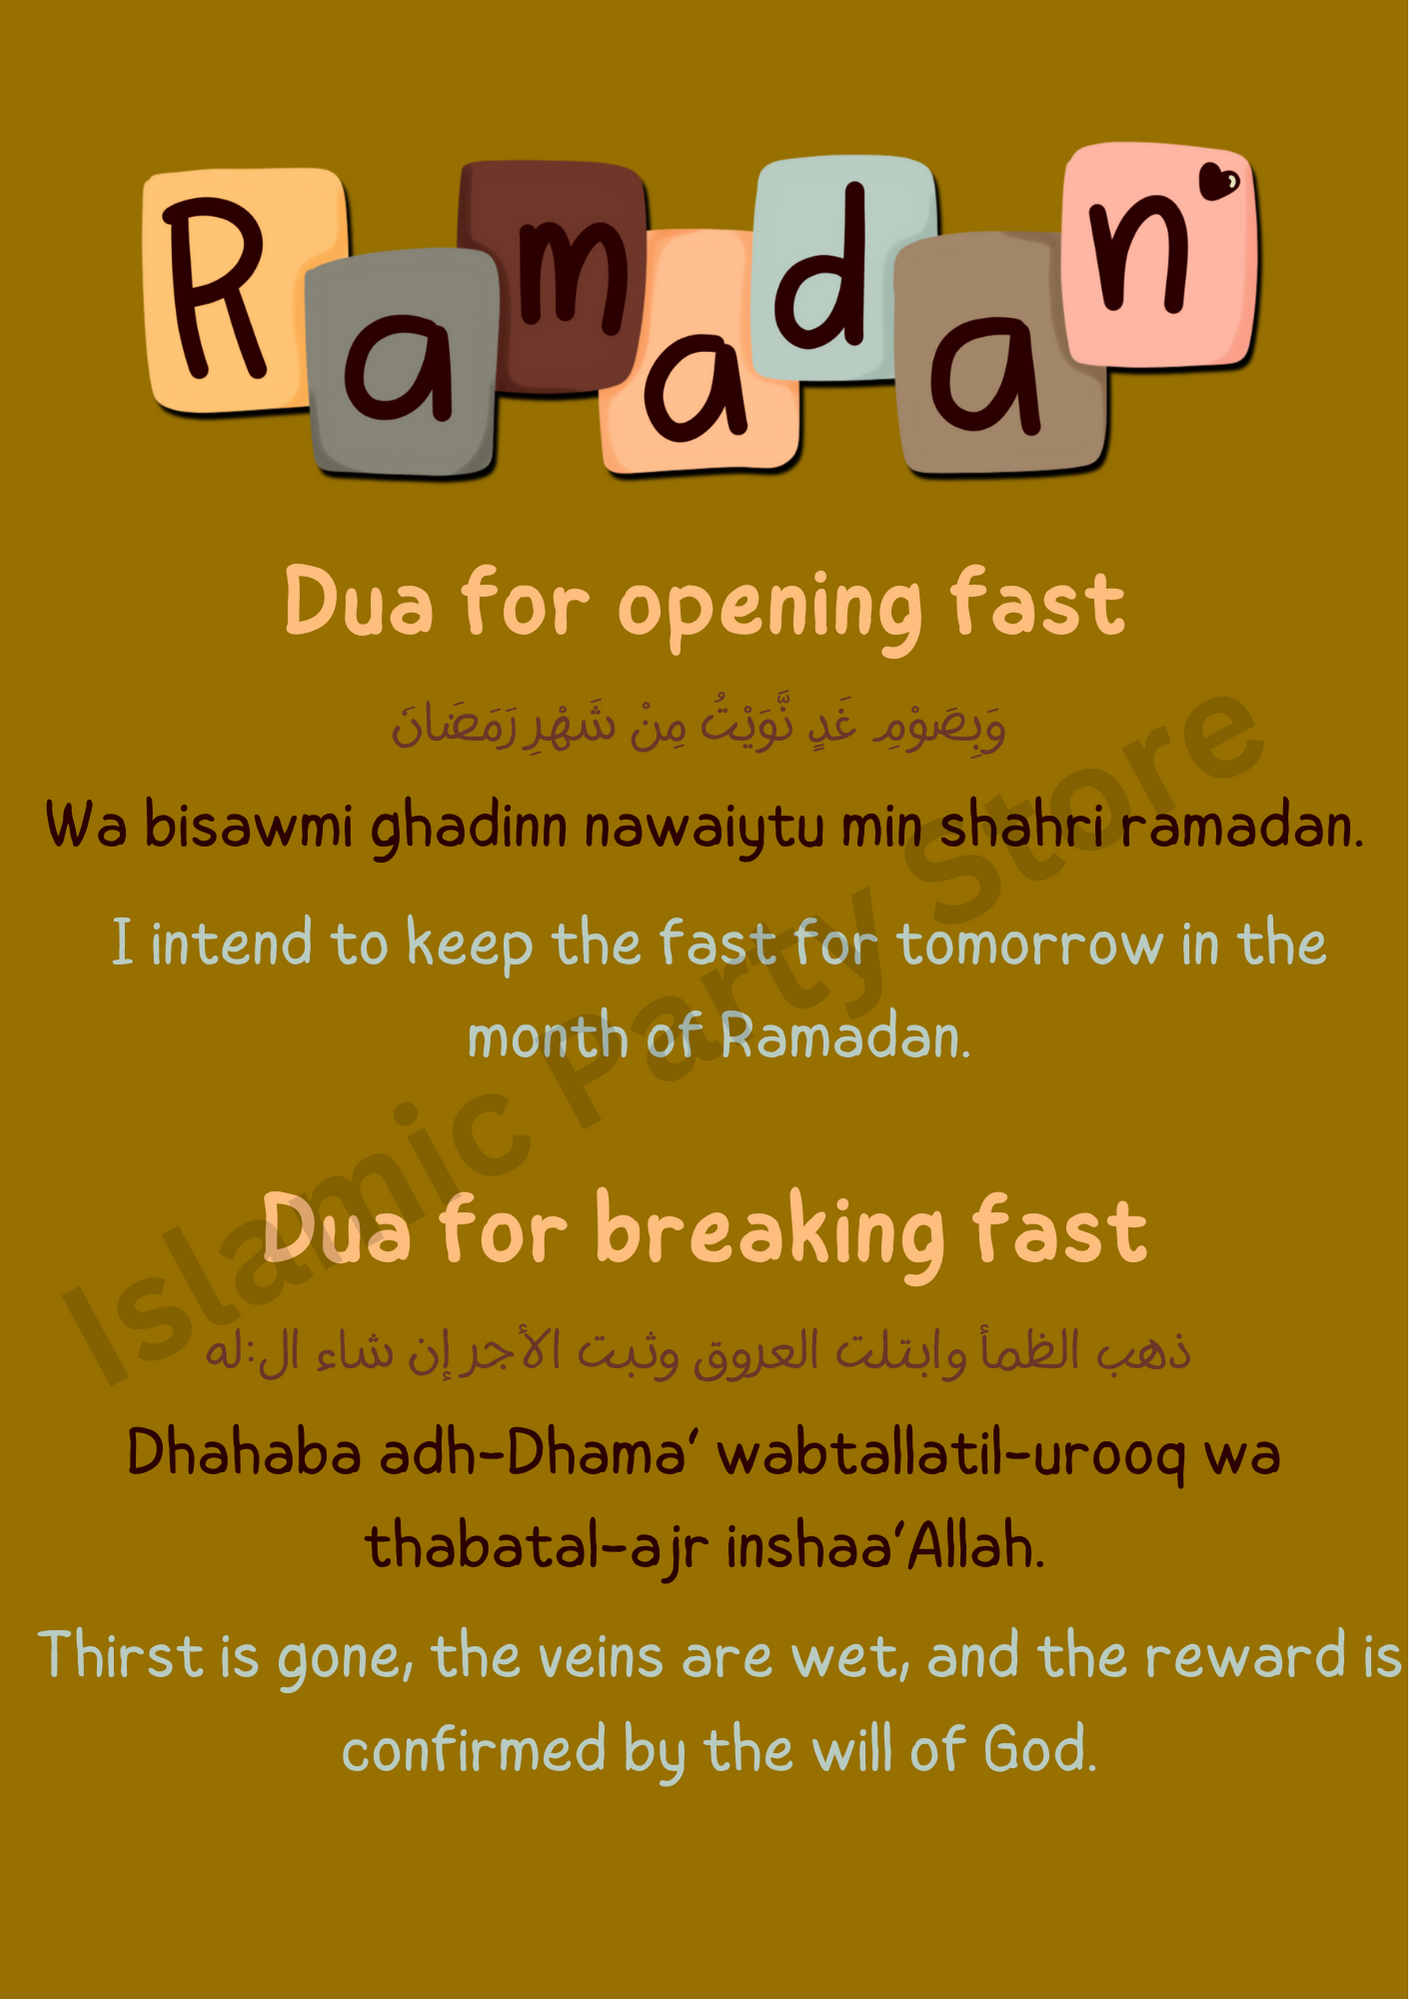 Dua for Opening and Breaking Fast